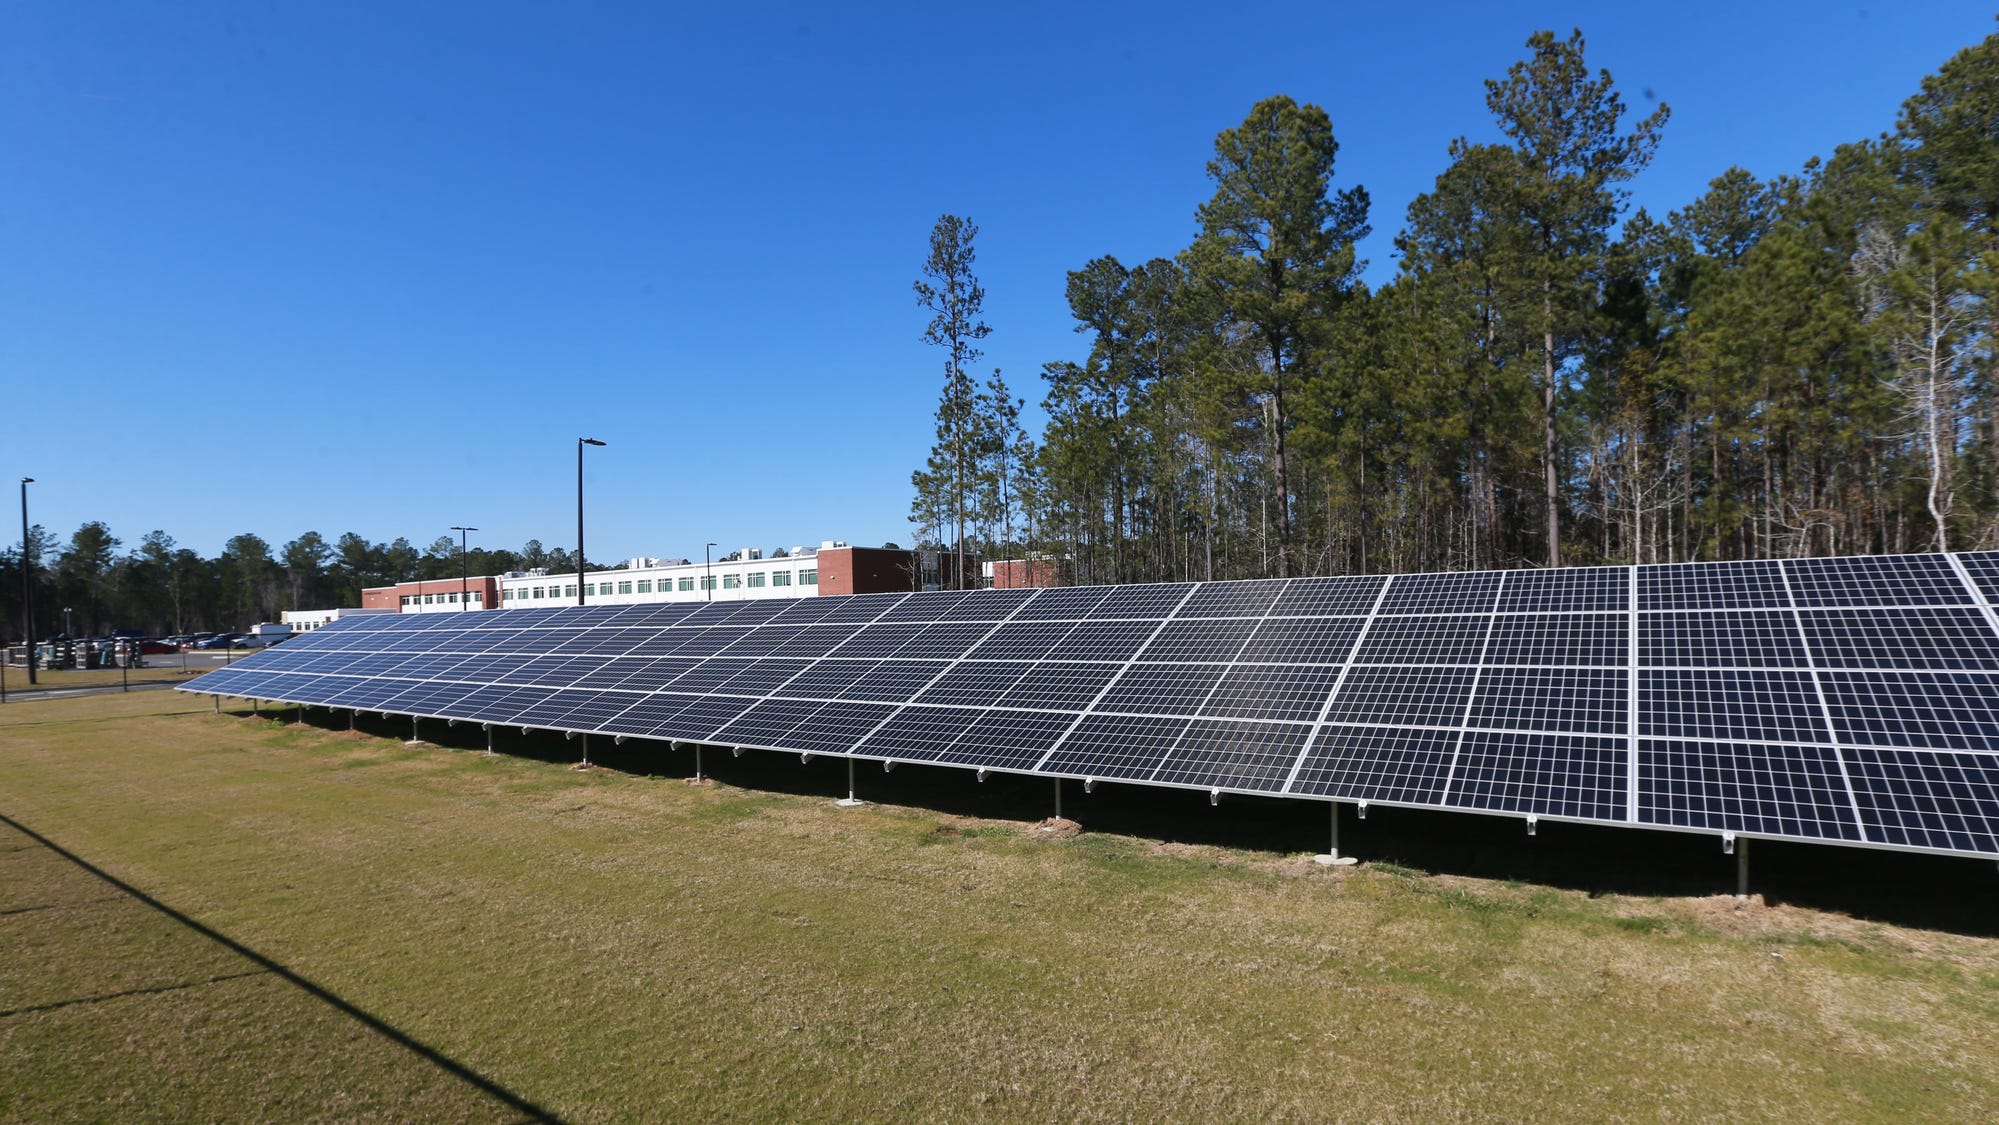 Savannah government encourages Power to expand clean energy